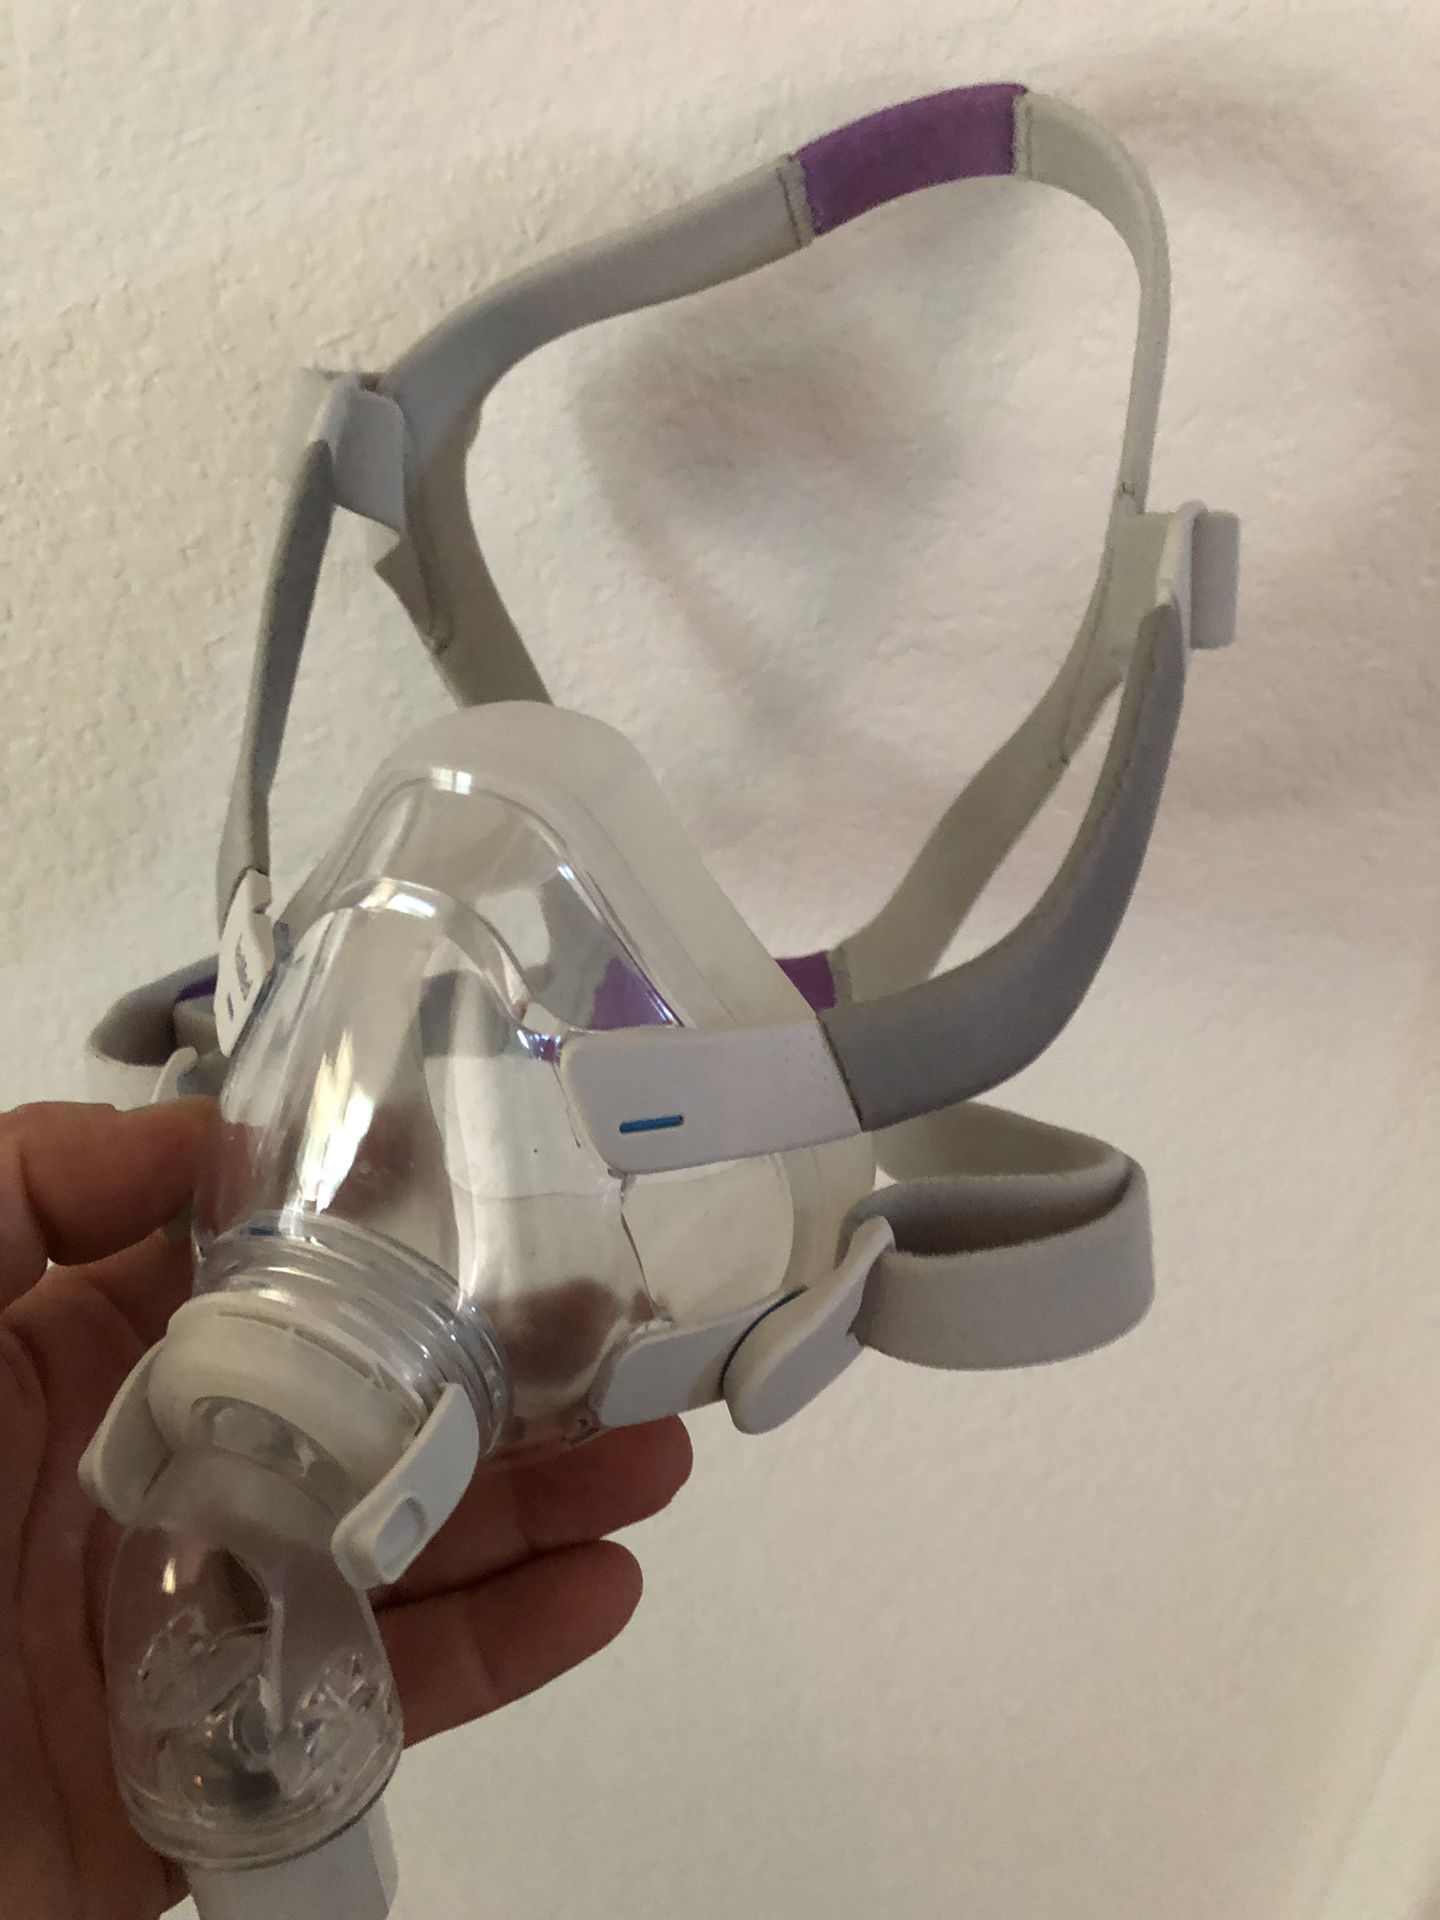 ResMed AirFit F20 Full face CPAP Mask and headgear